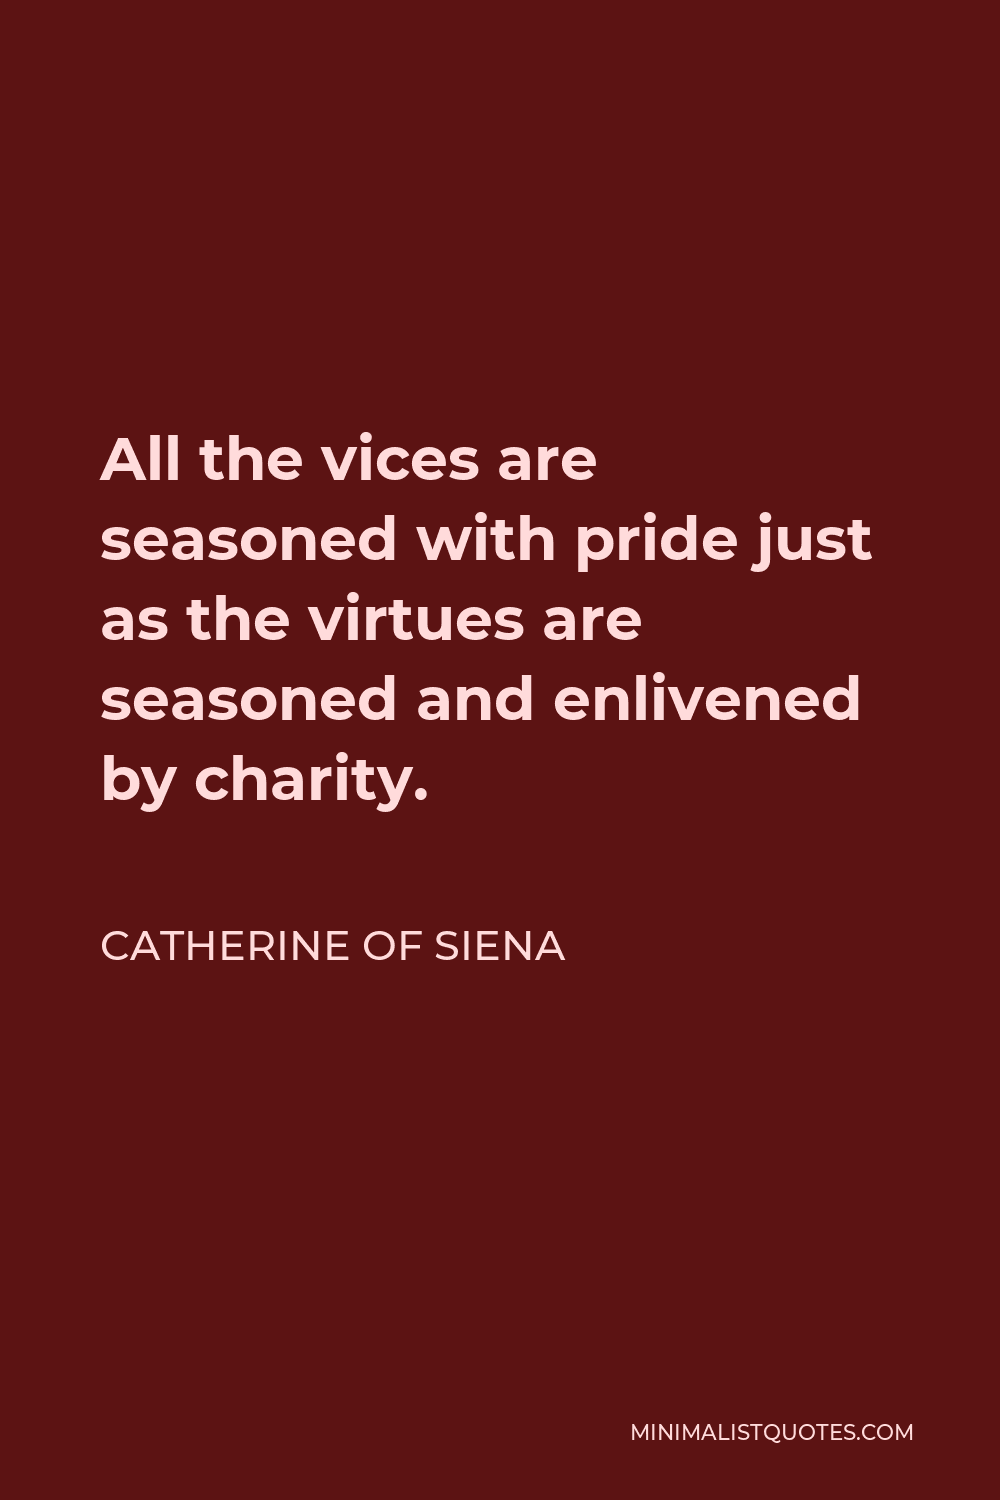 Catherine of Siena Quote - All the vices are seasoned with pride just as the virtues are seasoned and enlivened by charity.